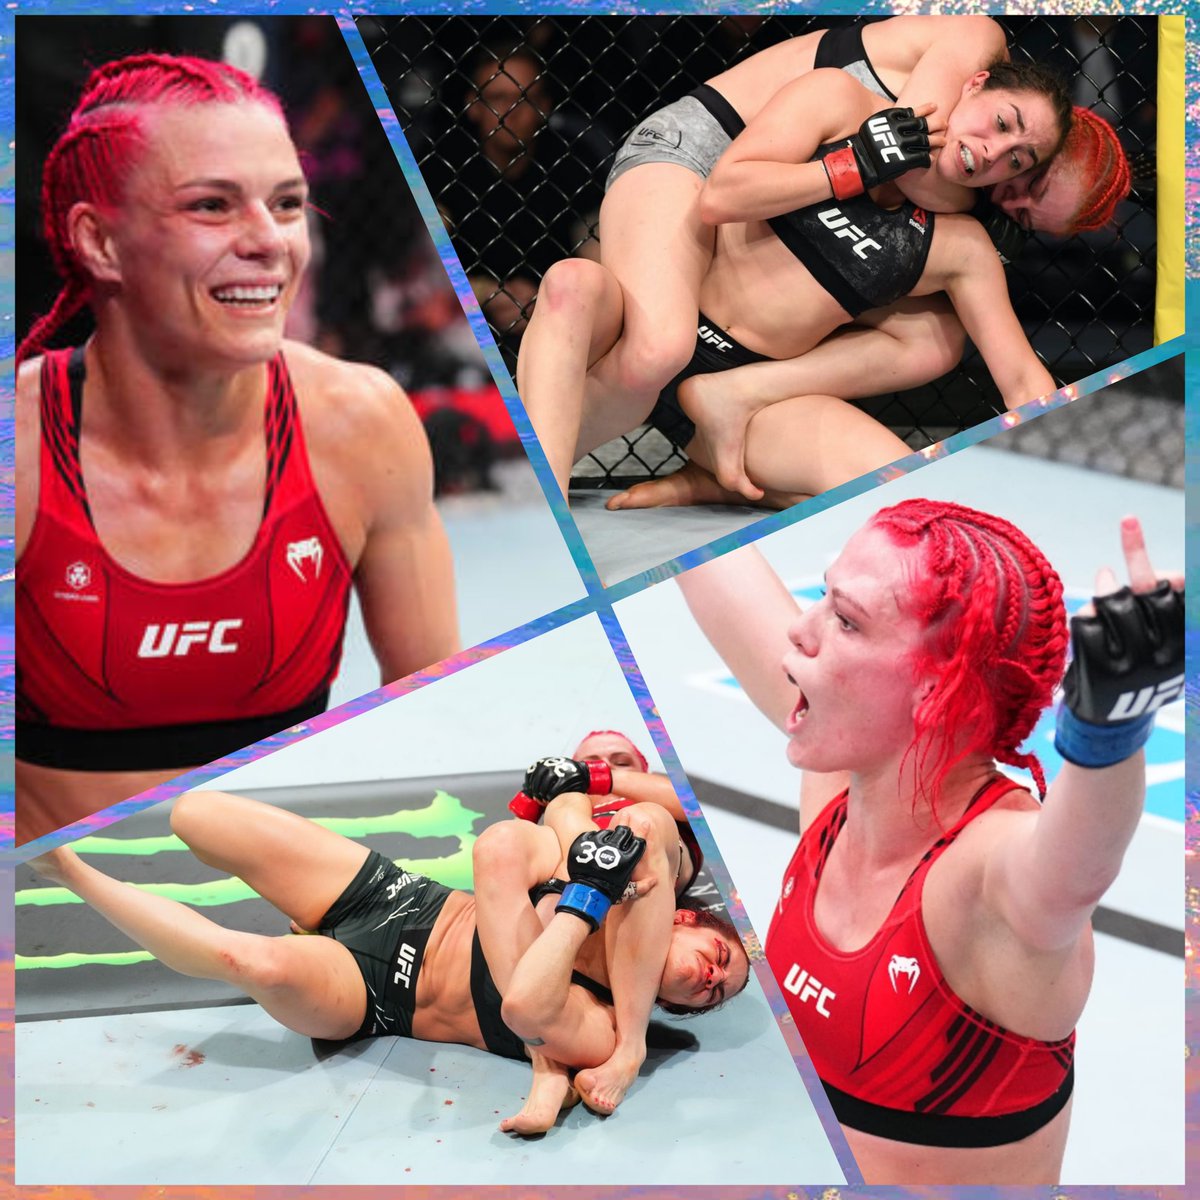 #UFC297 Prop Lock: @savage_ufc (Gillian Robertson) via Submission (+140) She is one of th best on the ground and has the perfect match up to show it More props and thhe lottery parlay (+34k) is up now Allin4bettortimes.com #MMATwitter #GamblingTwiiter #GamblingX #bettingtips